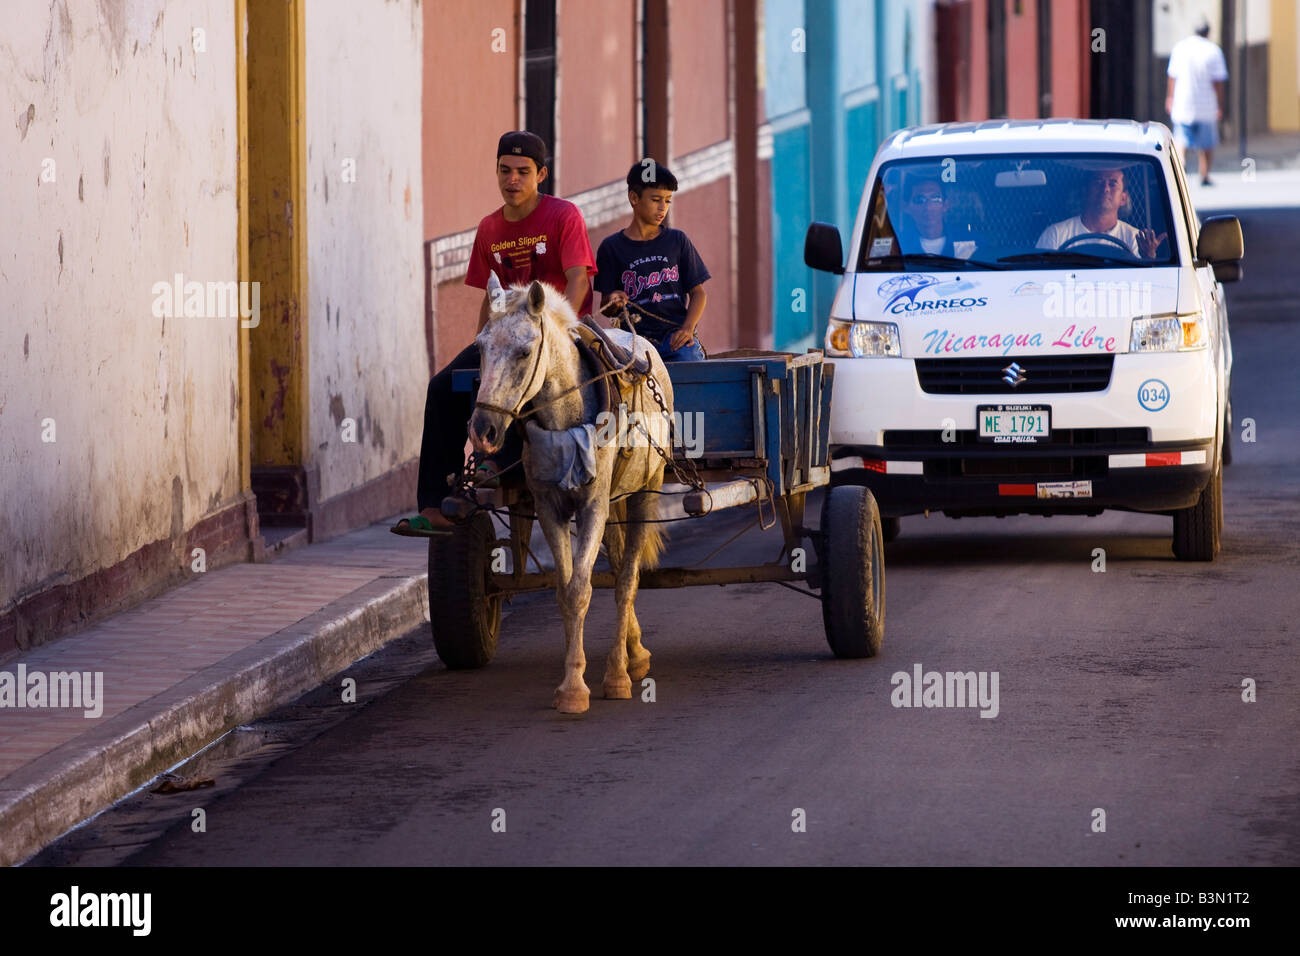 A vehicle with an impatient driver is delayed behind a horse and cart in the narrow streets of Granada Nicaragua Stock Photo